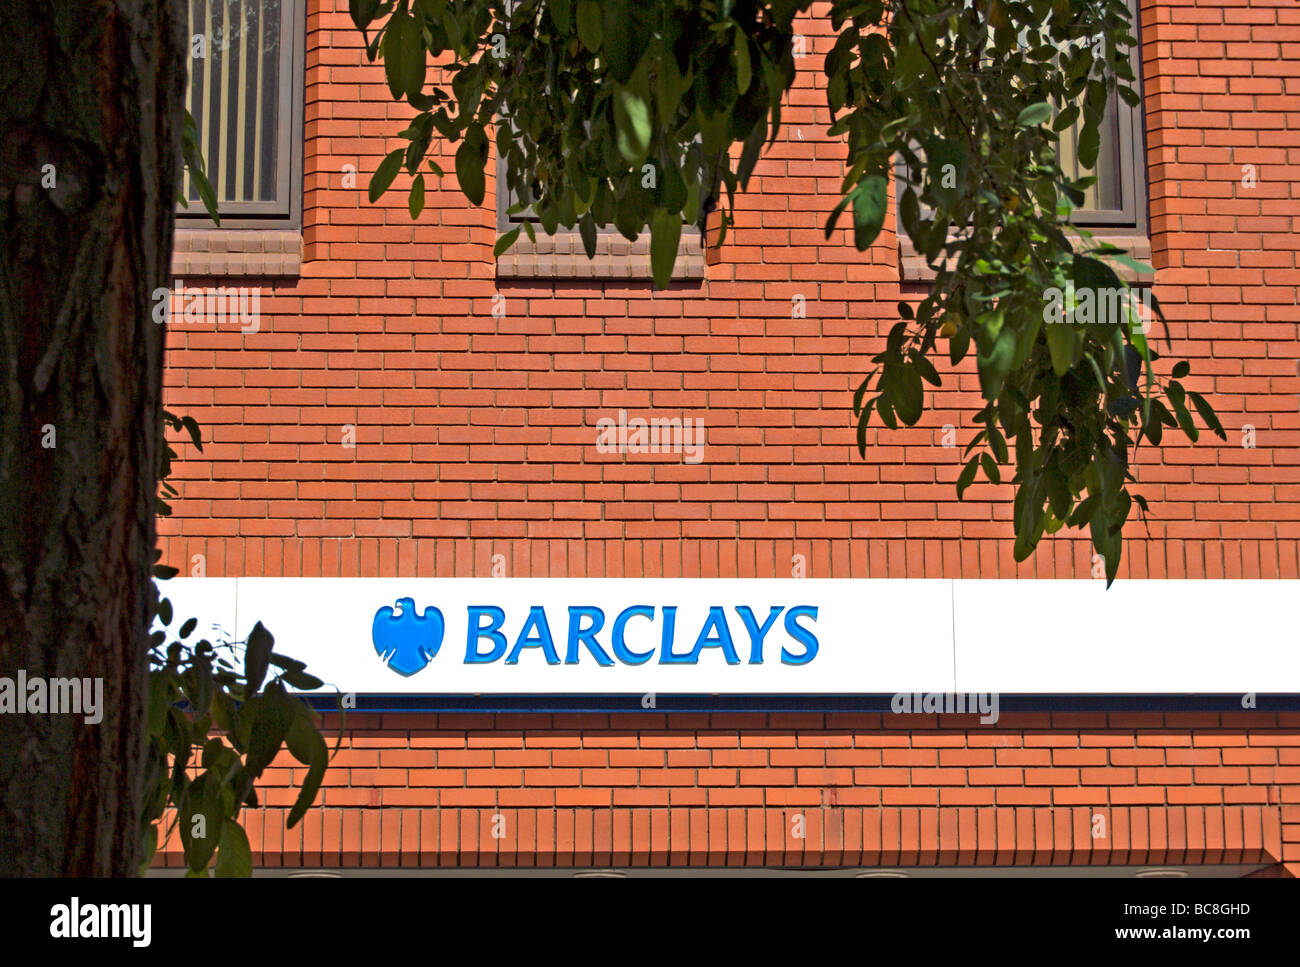 barclays bank name and logo on a redbrick wall, in hounslow high street, middlesex, england Stock Photo